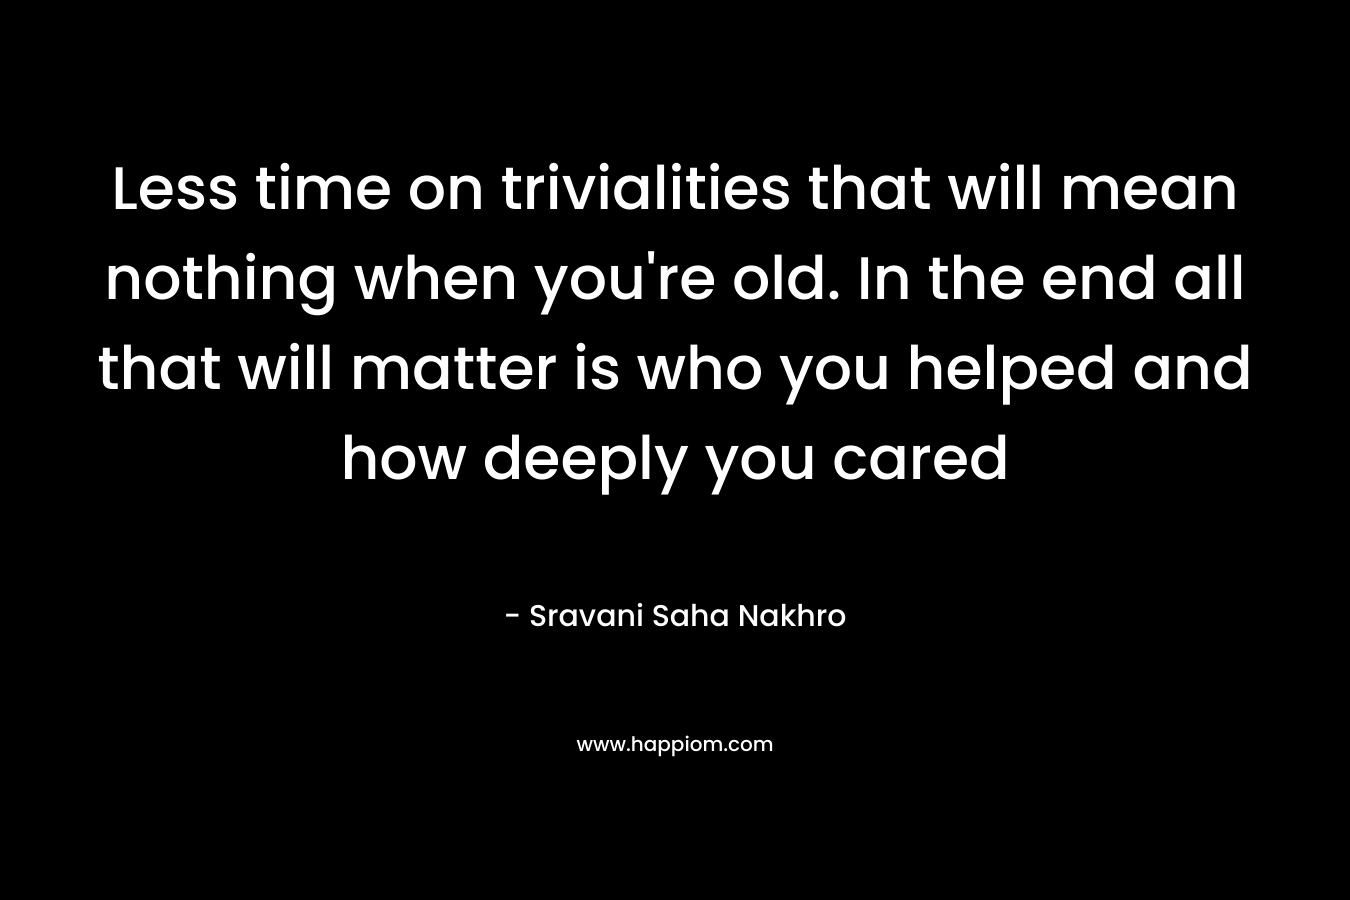 Less time on trivialities that will mean nothing when you’re old. In the end all that will matter is who you helped and how deeply you cared – Sravani Saha Nakhro